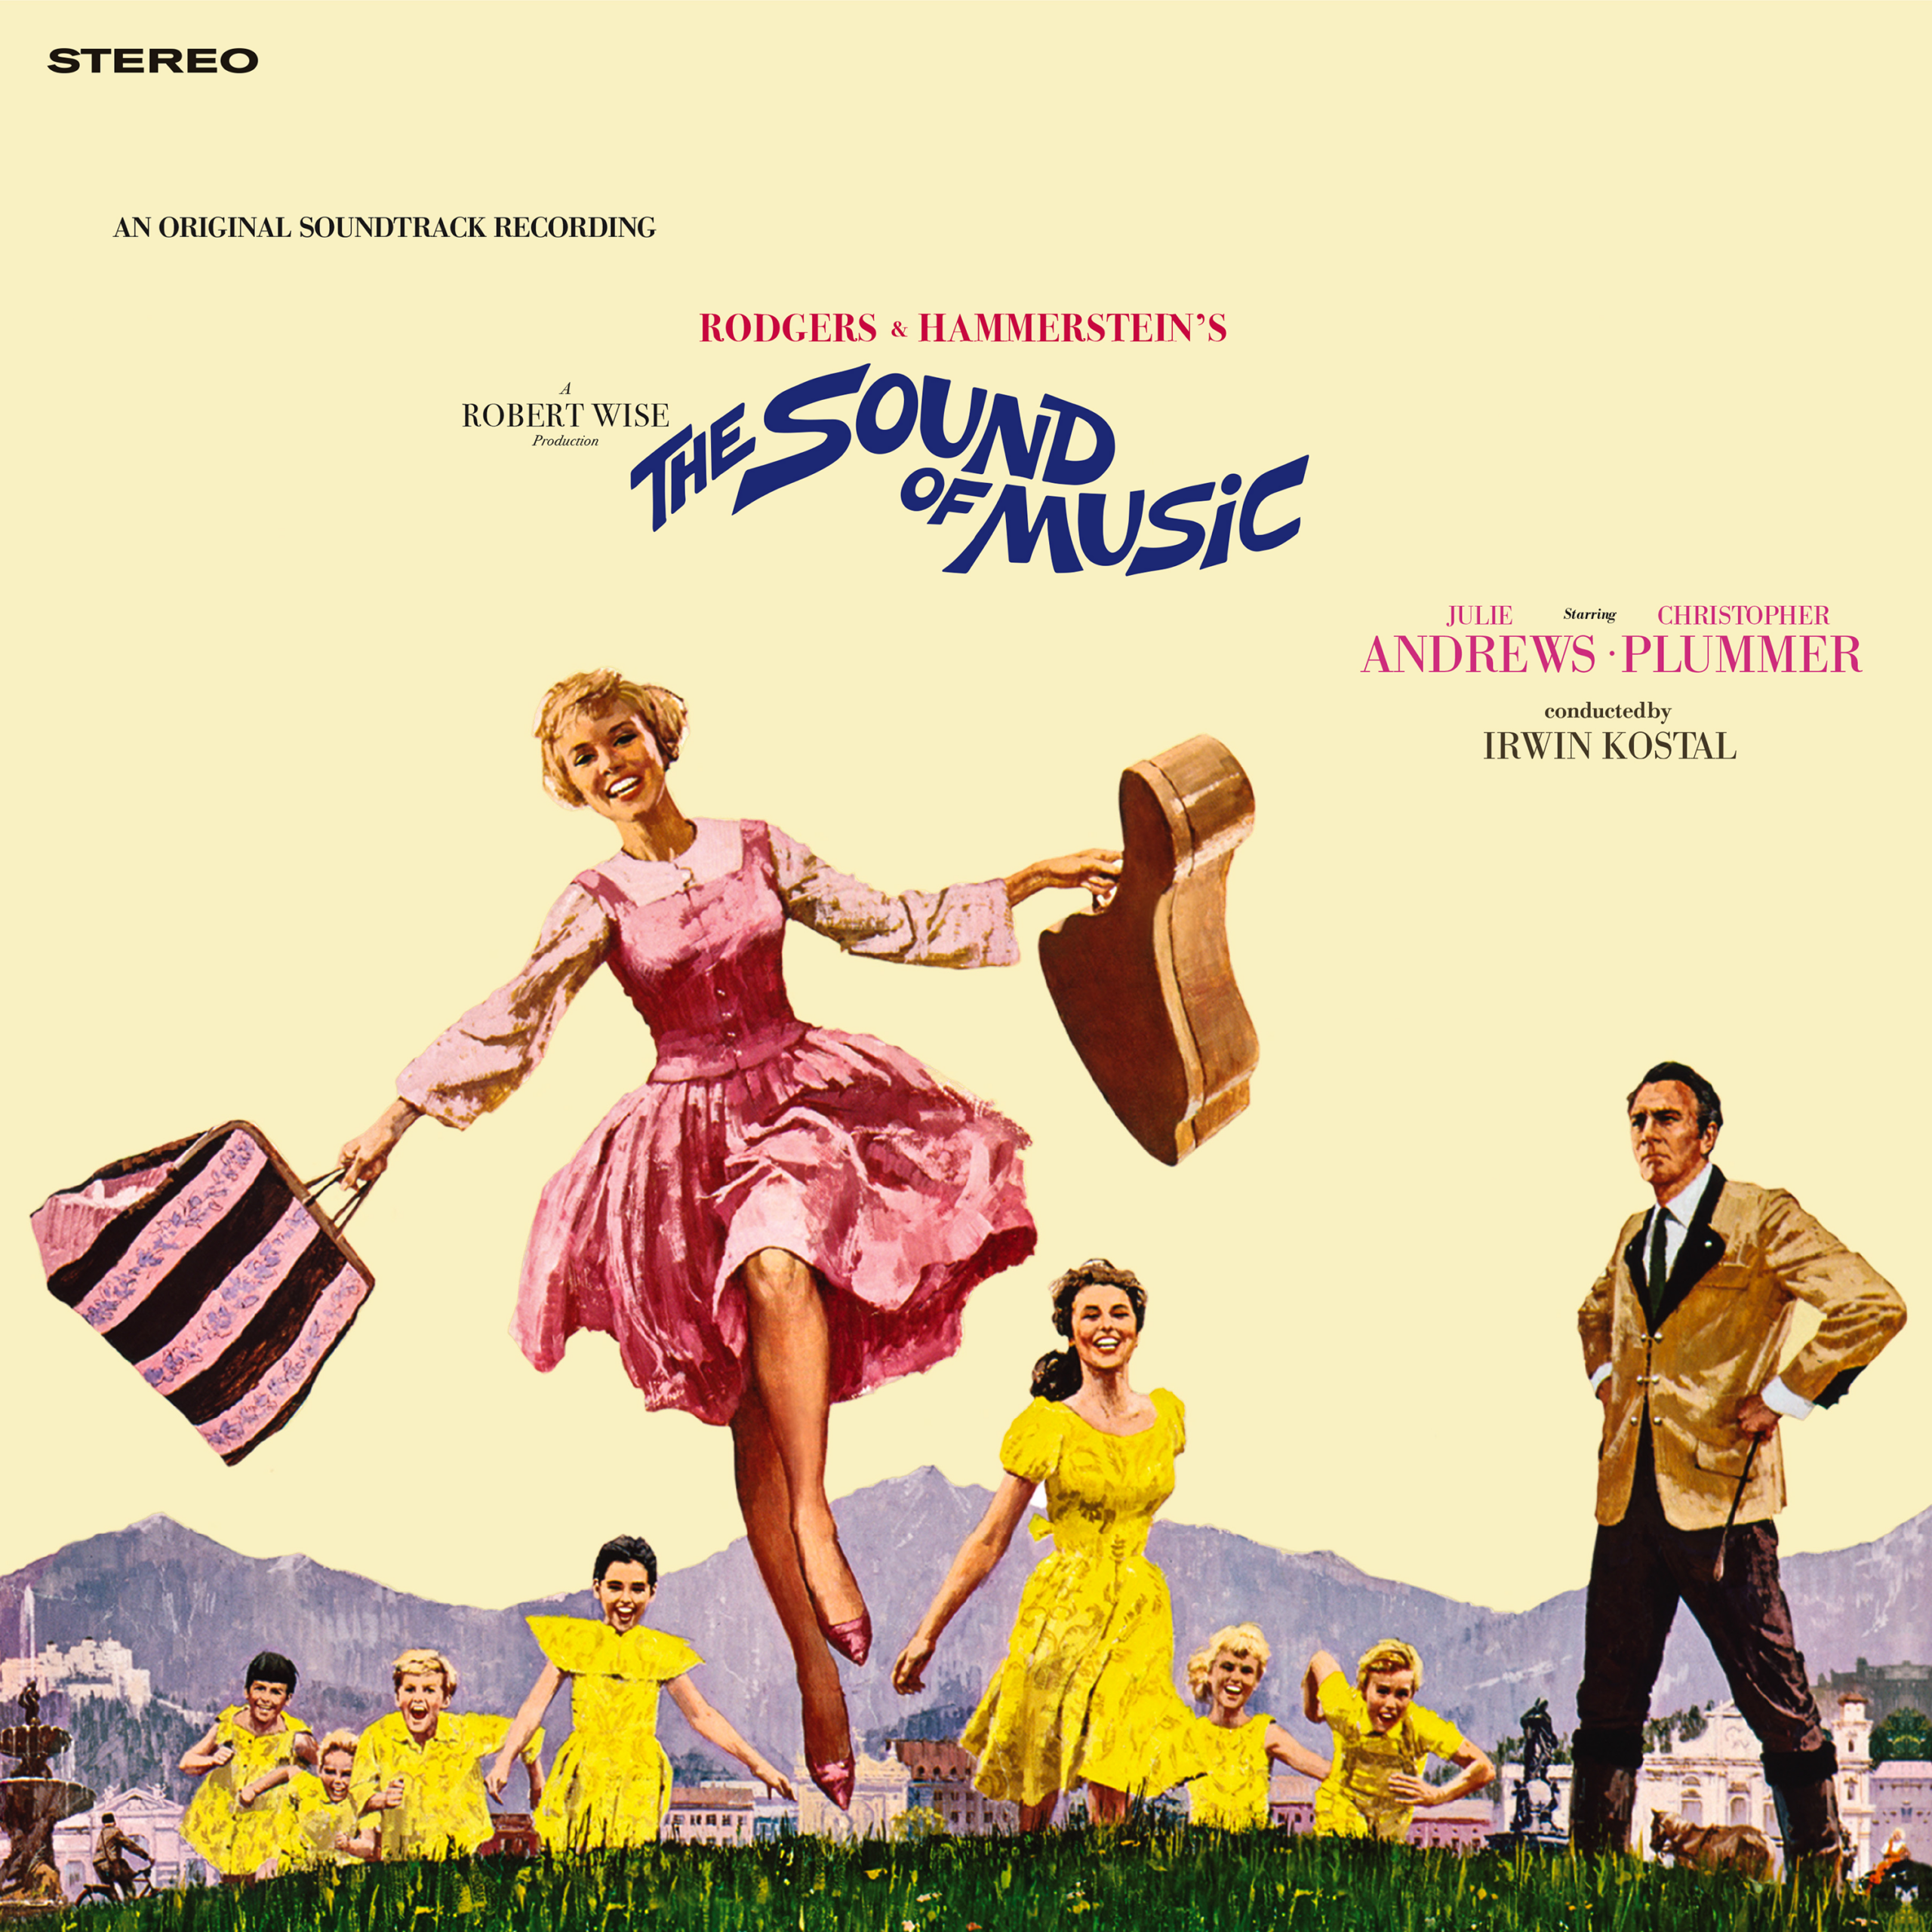 The Complete Sound of Music